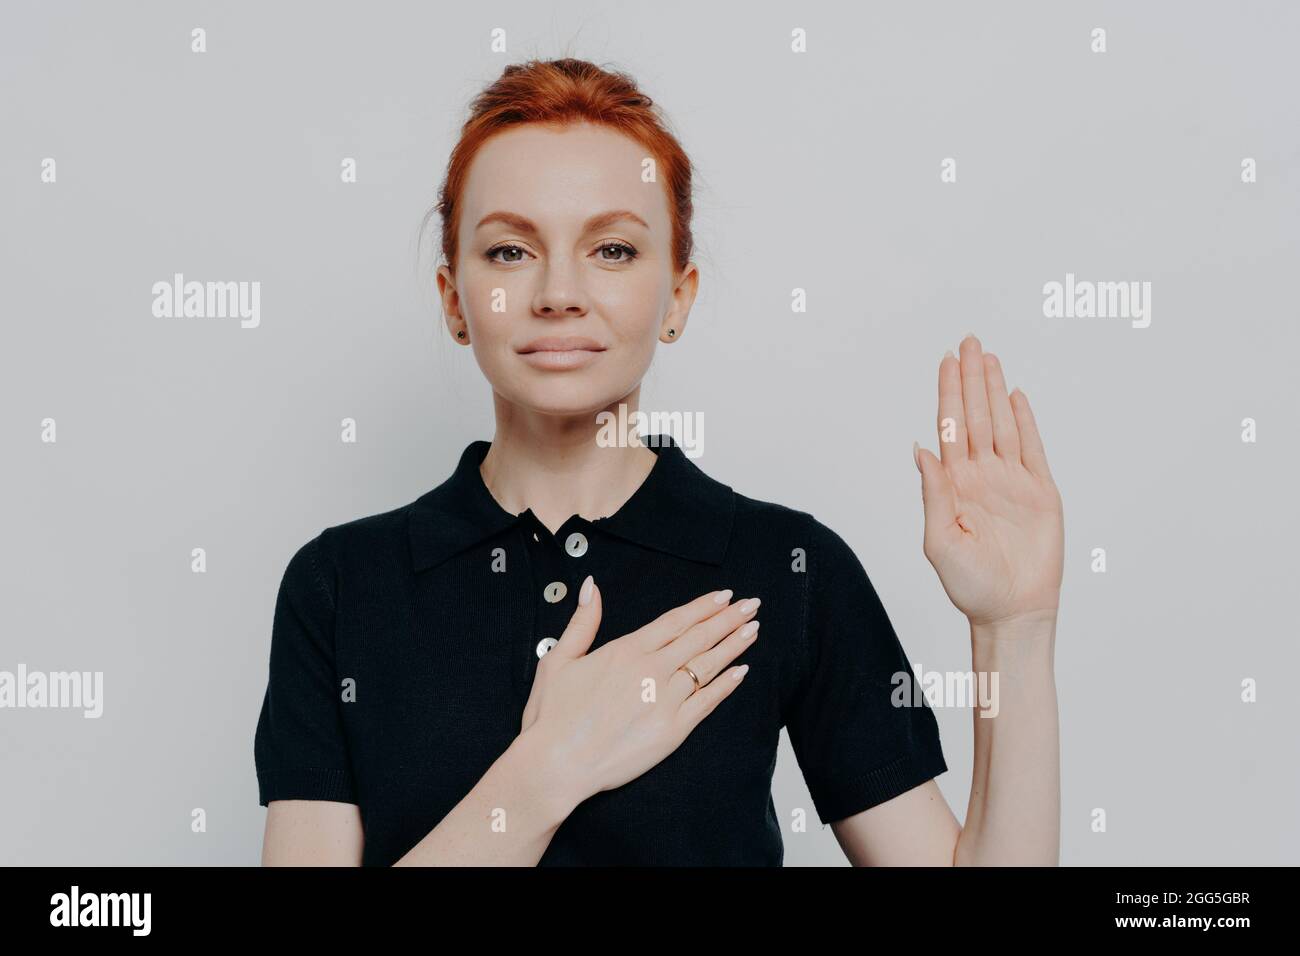 Beautiful red haired patriotic woman swearing with hand on chest and open palm Stock Photo